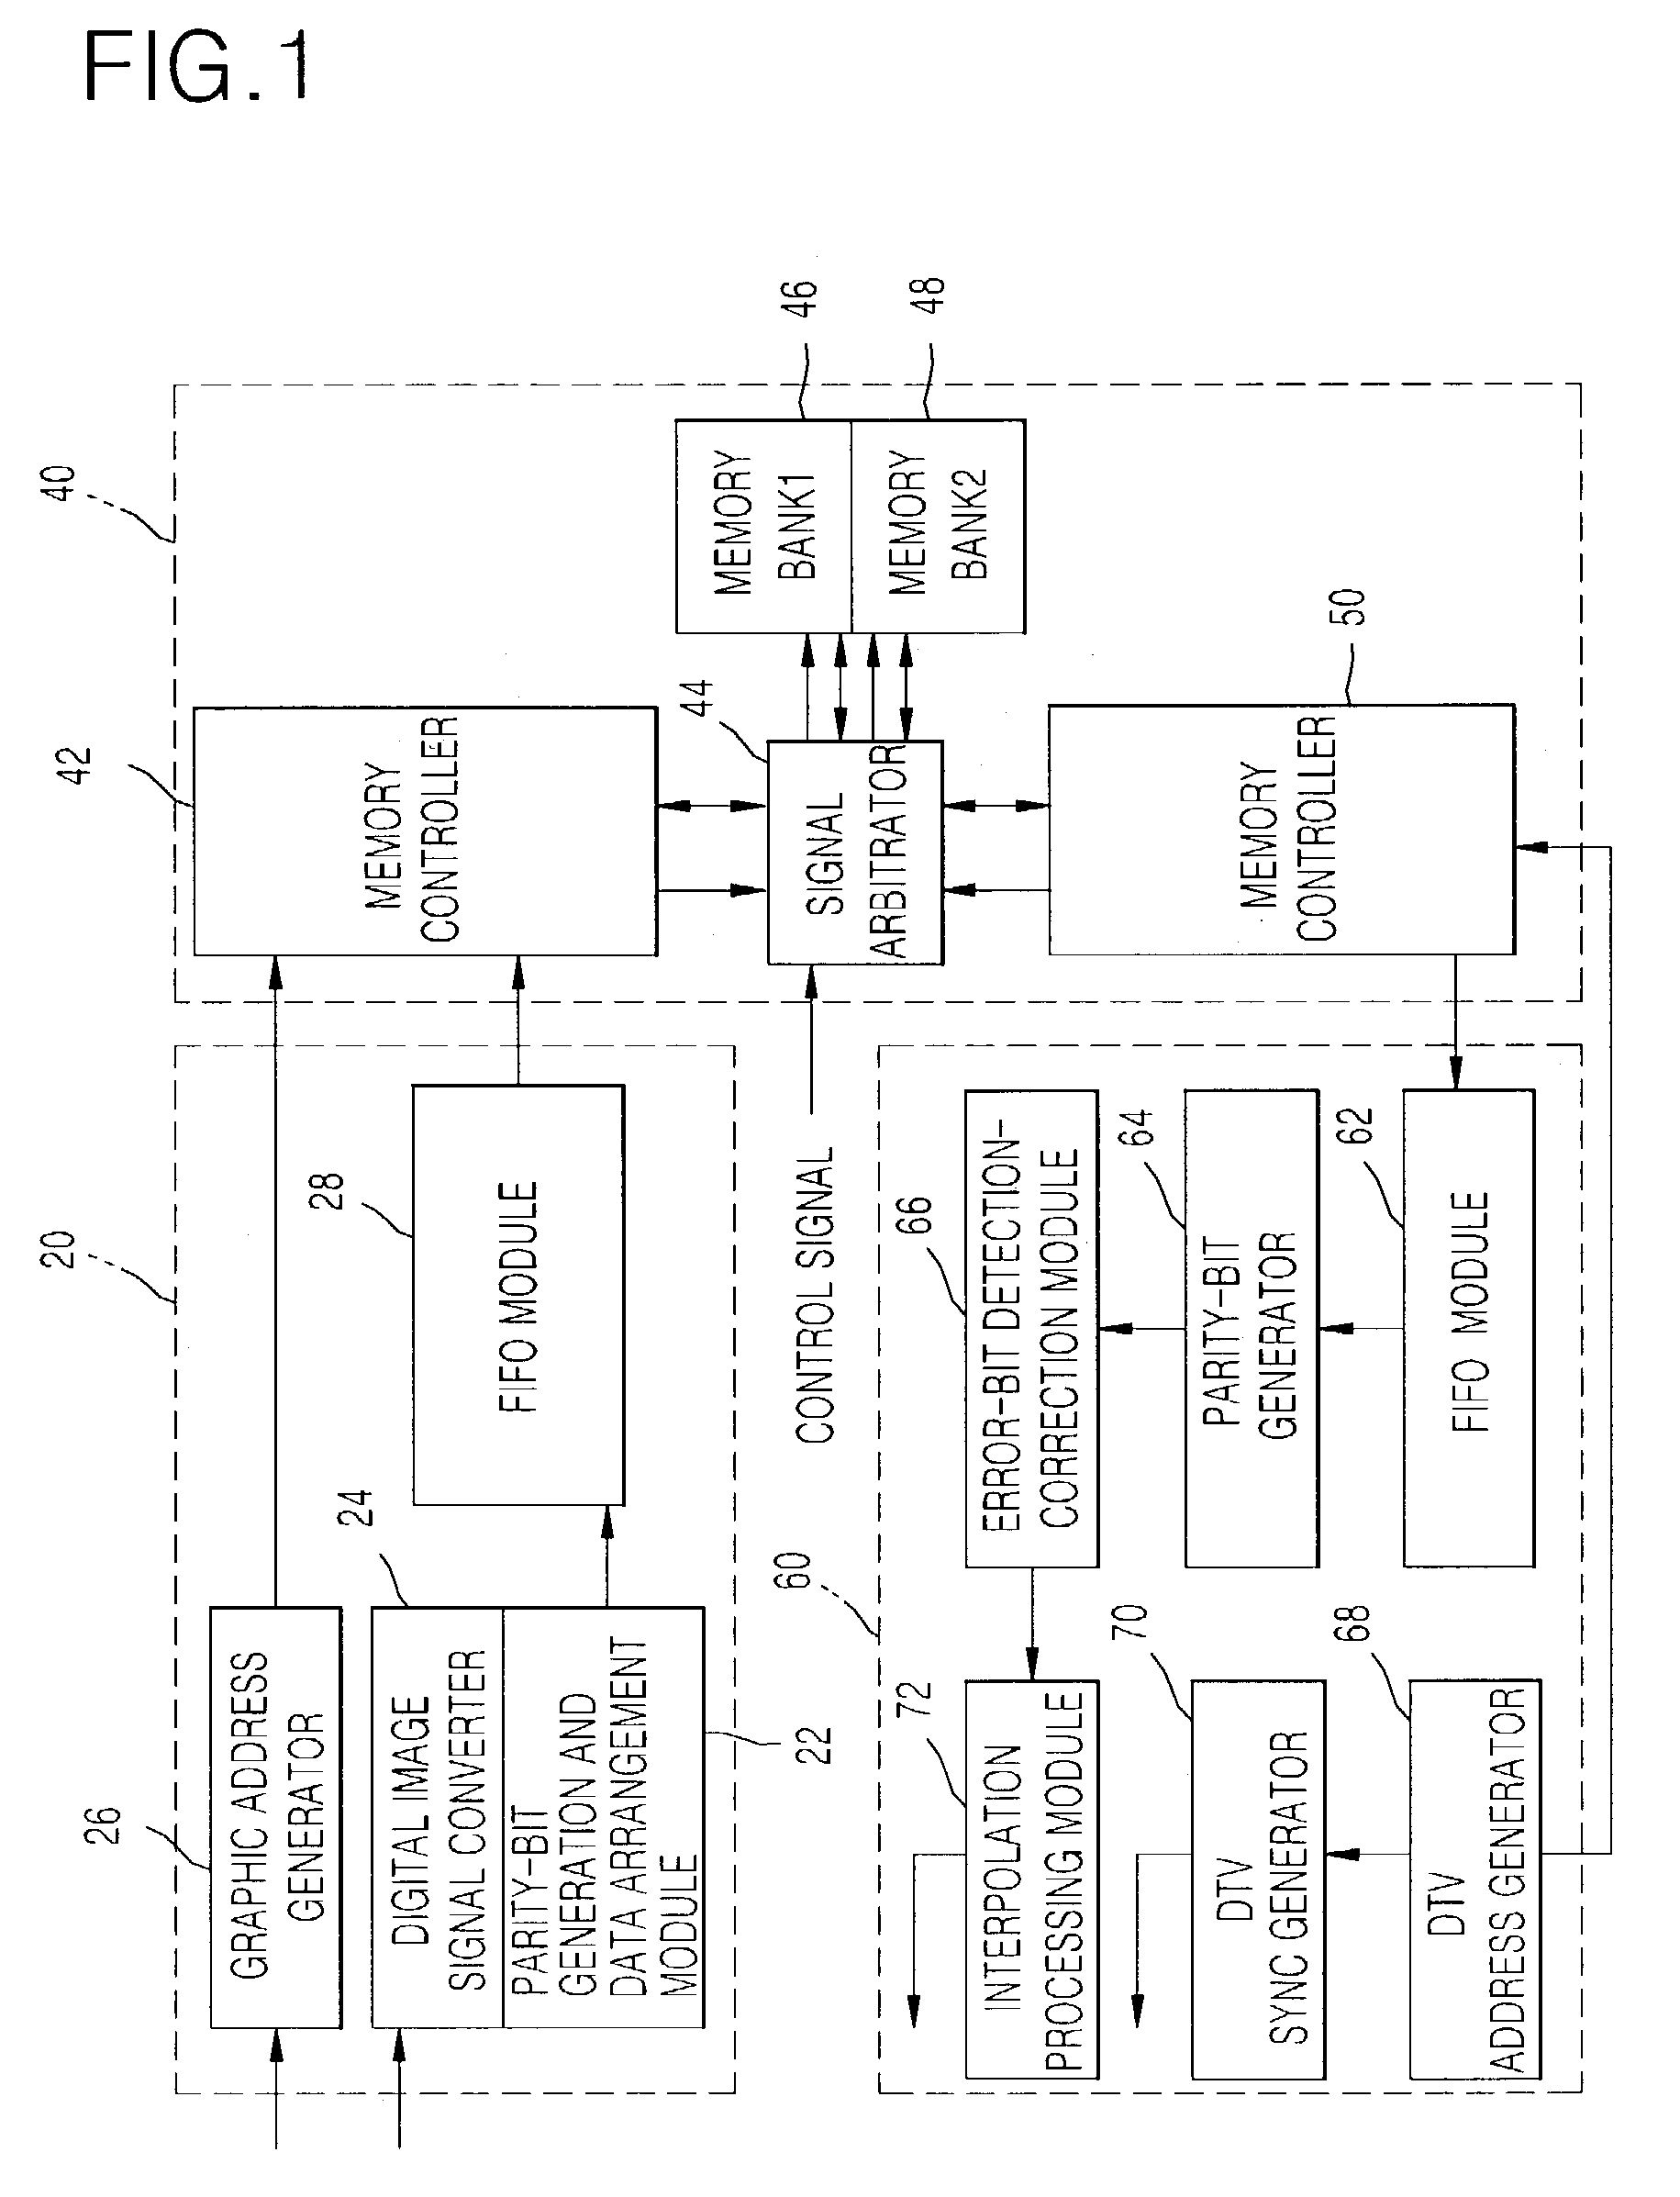 Apparatus and method for image conversion and automatic error correction for digital television receiver